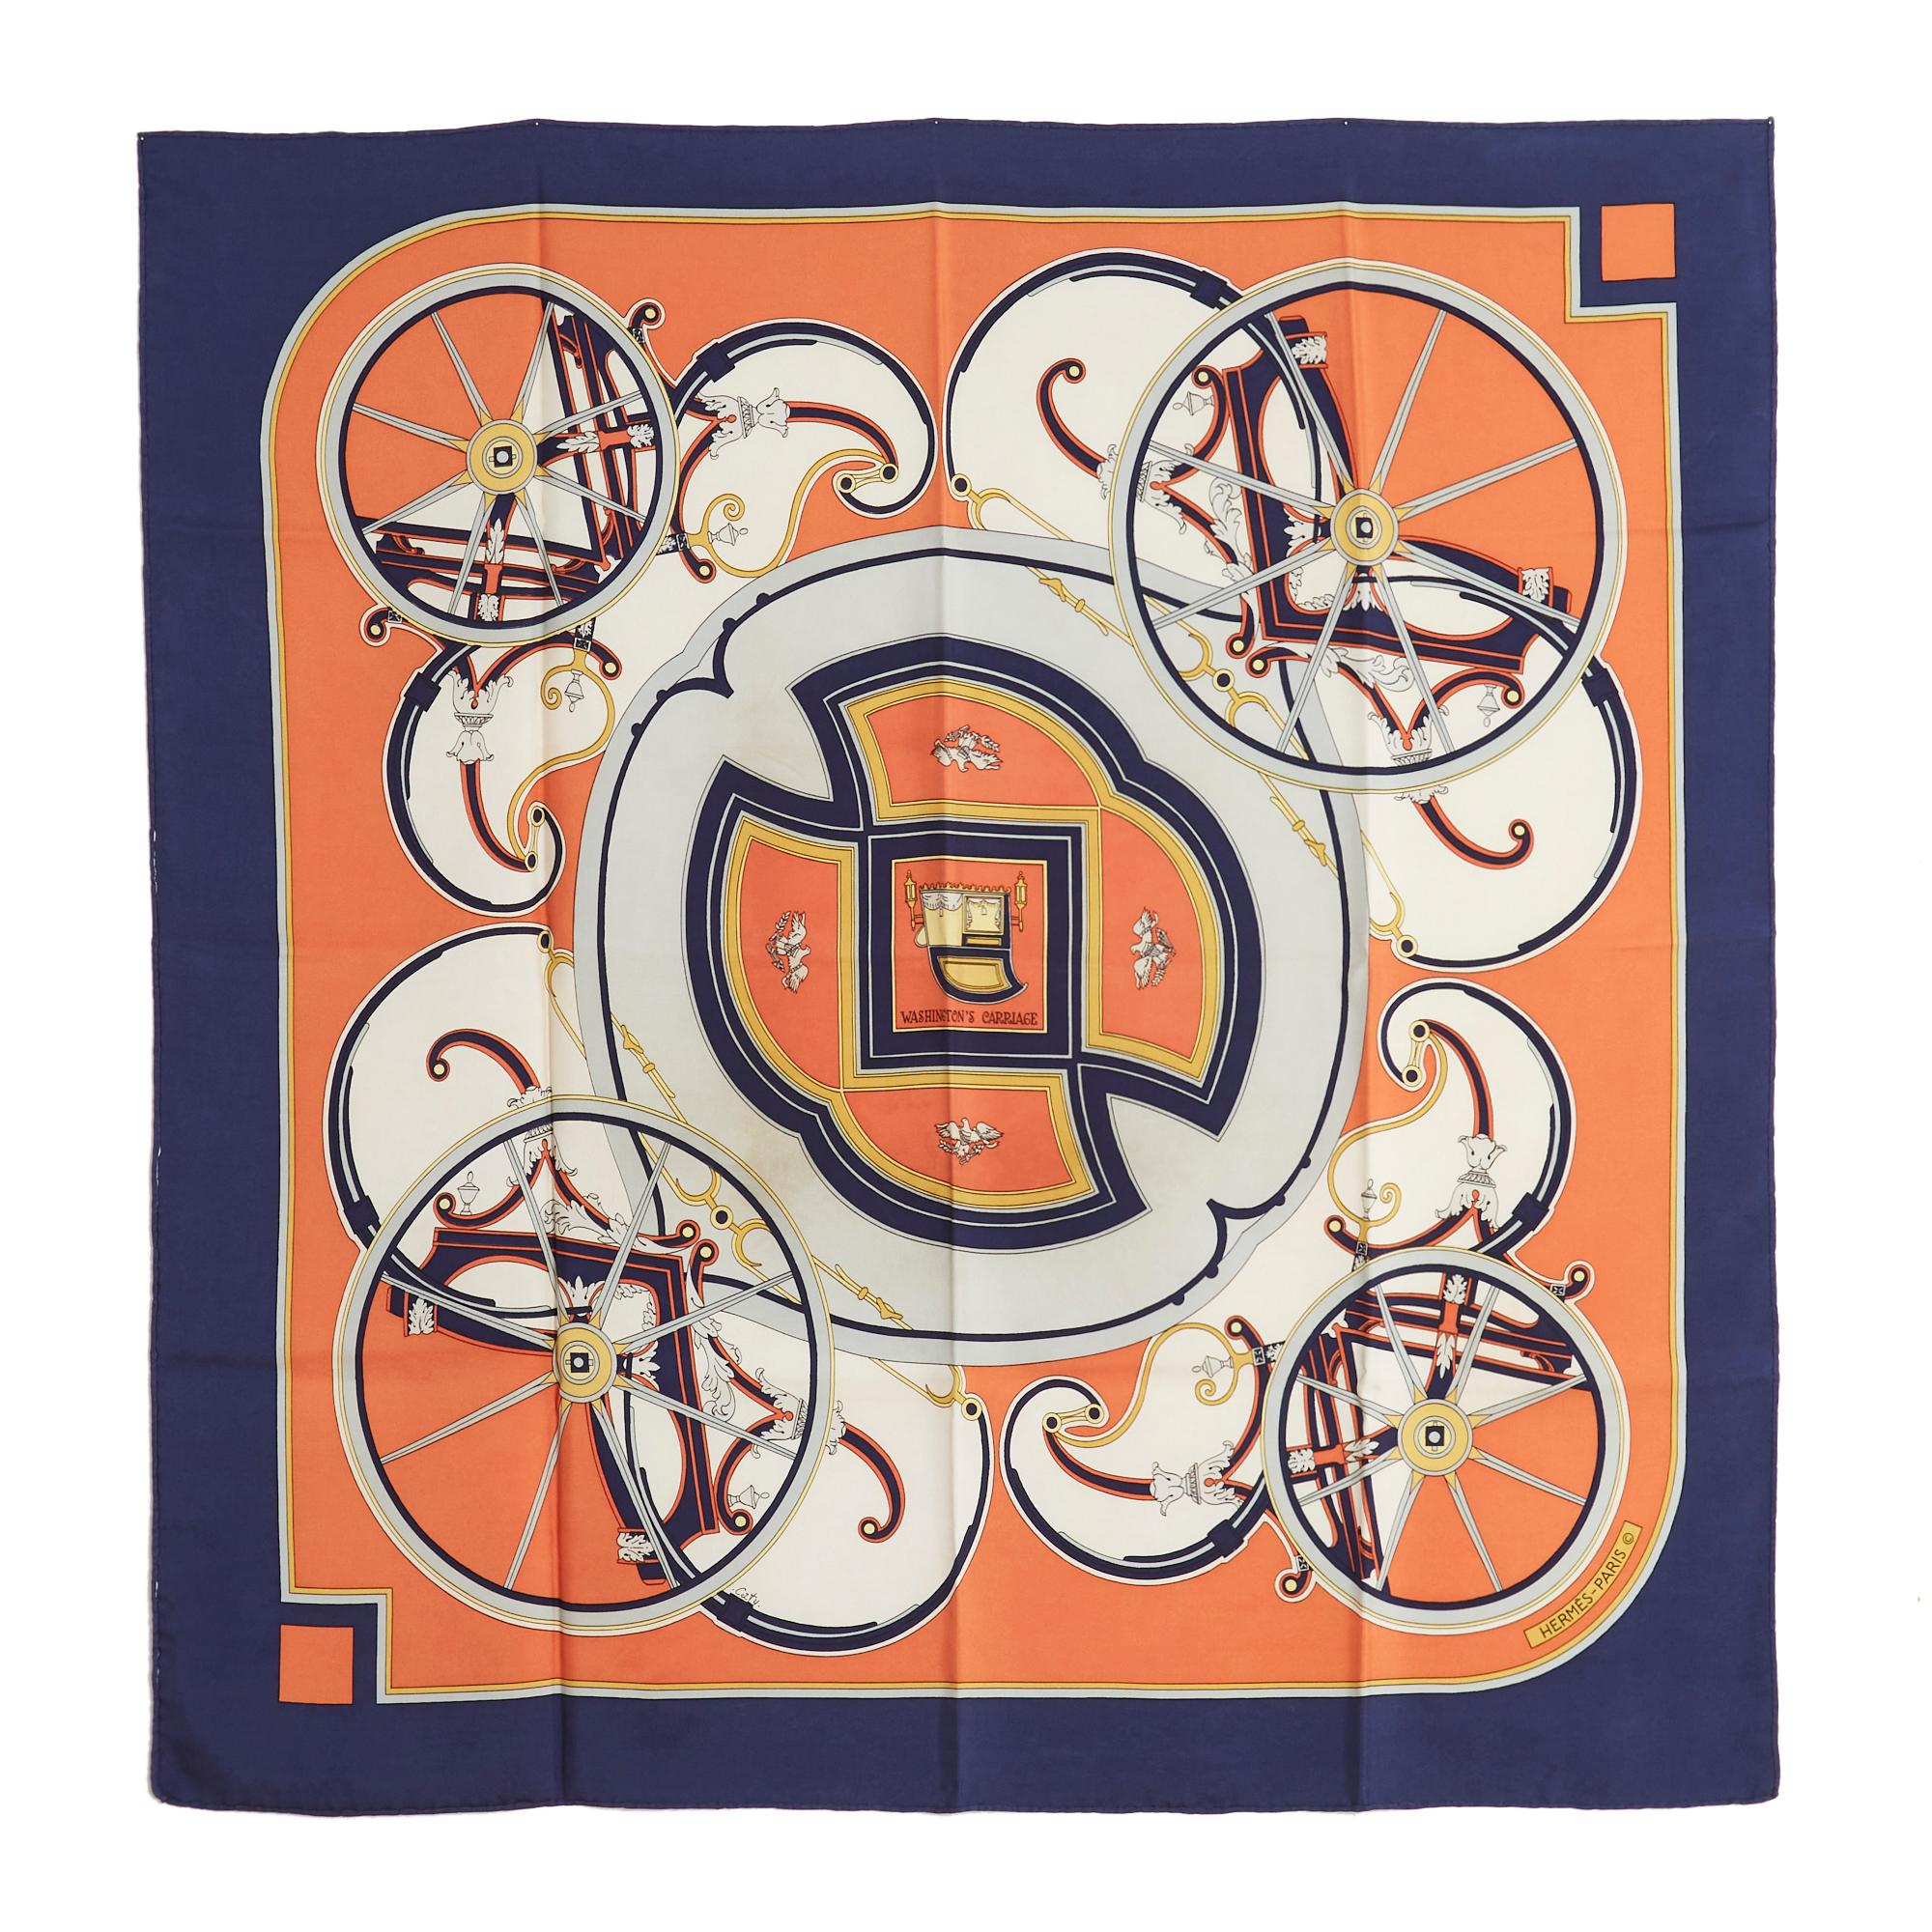 Hermès square 90 scarf in silk twill, Washington's Carriage pattern by Cathy Latham, published in 1979 and reissued in 1981, orange background (shrimp), navy blue edges. Width 90 cm x length 90 cm approximately. The square is vintage and it probably